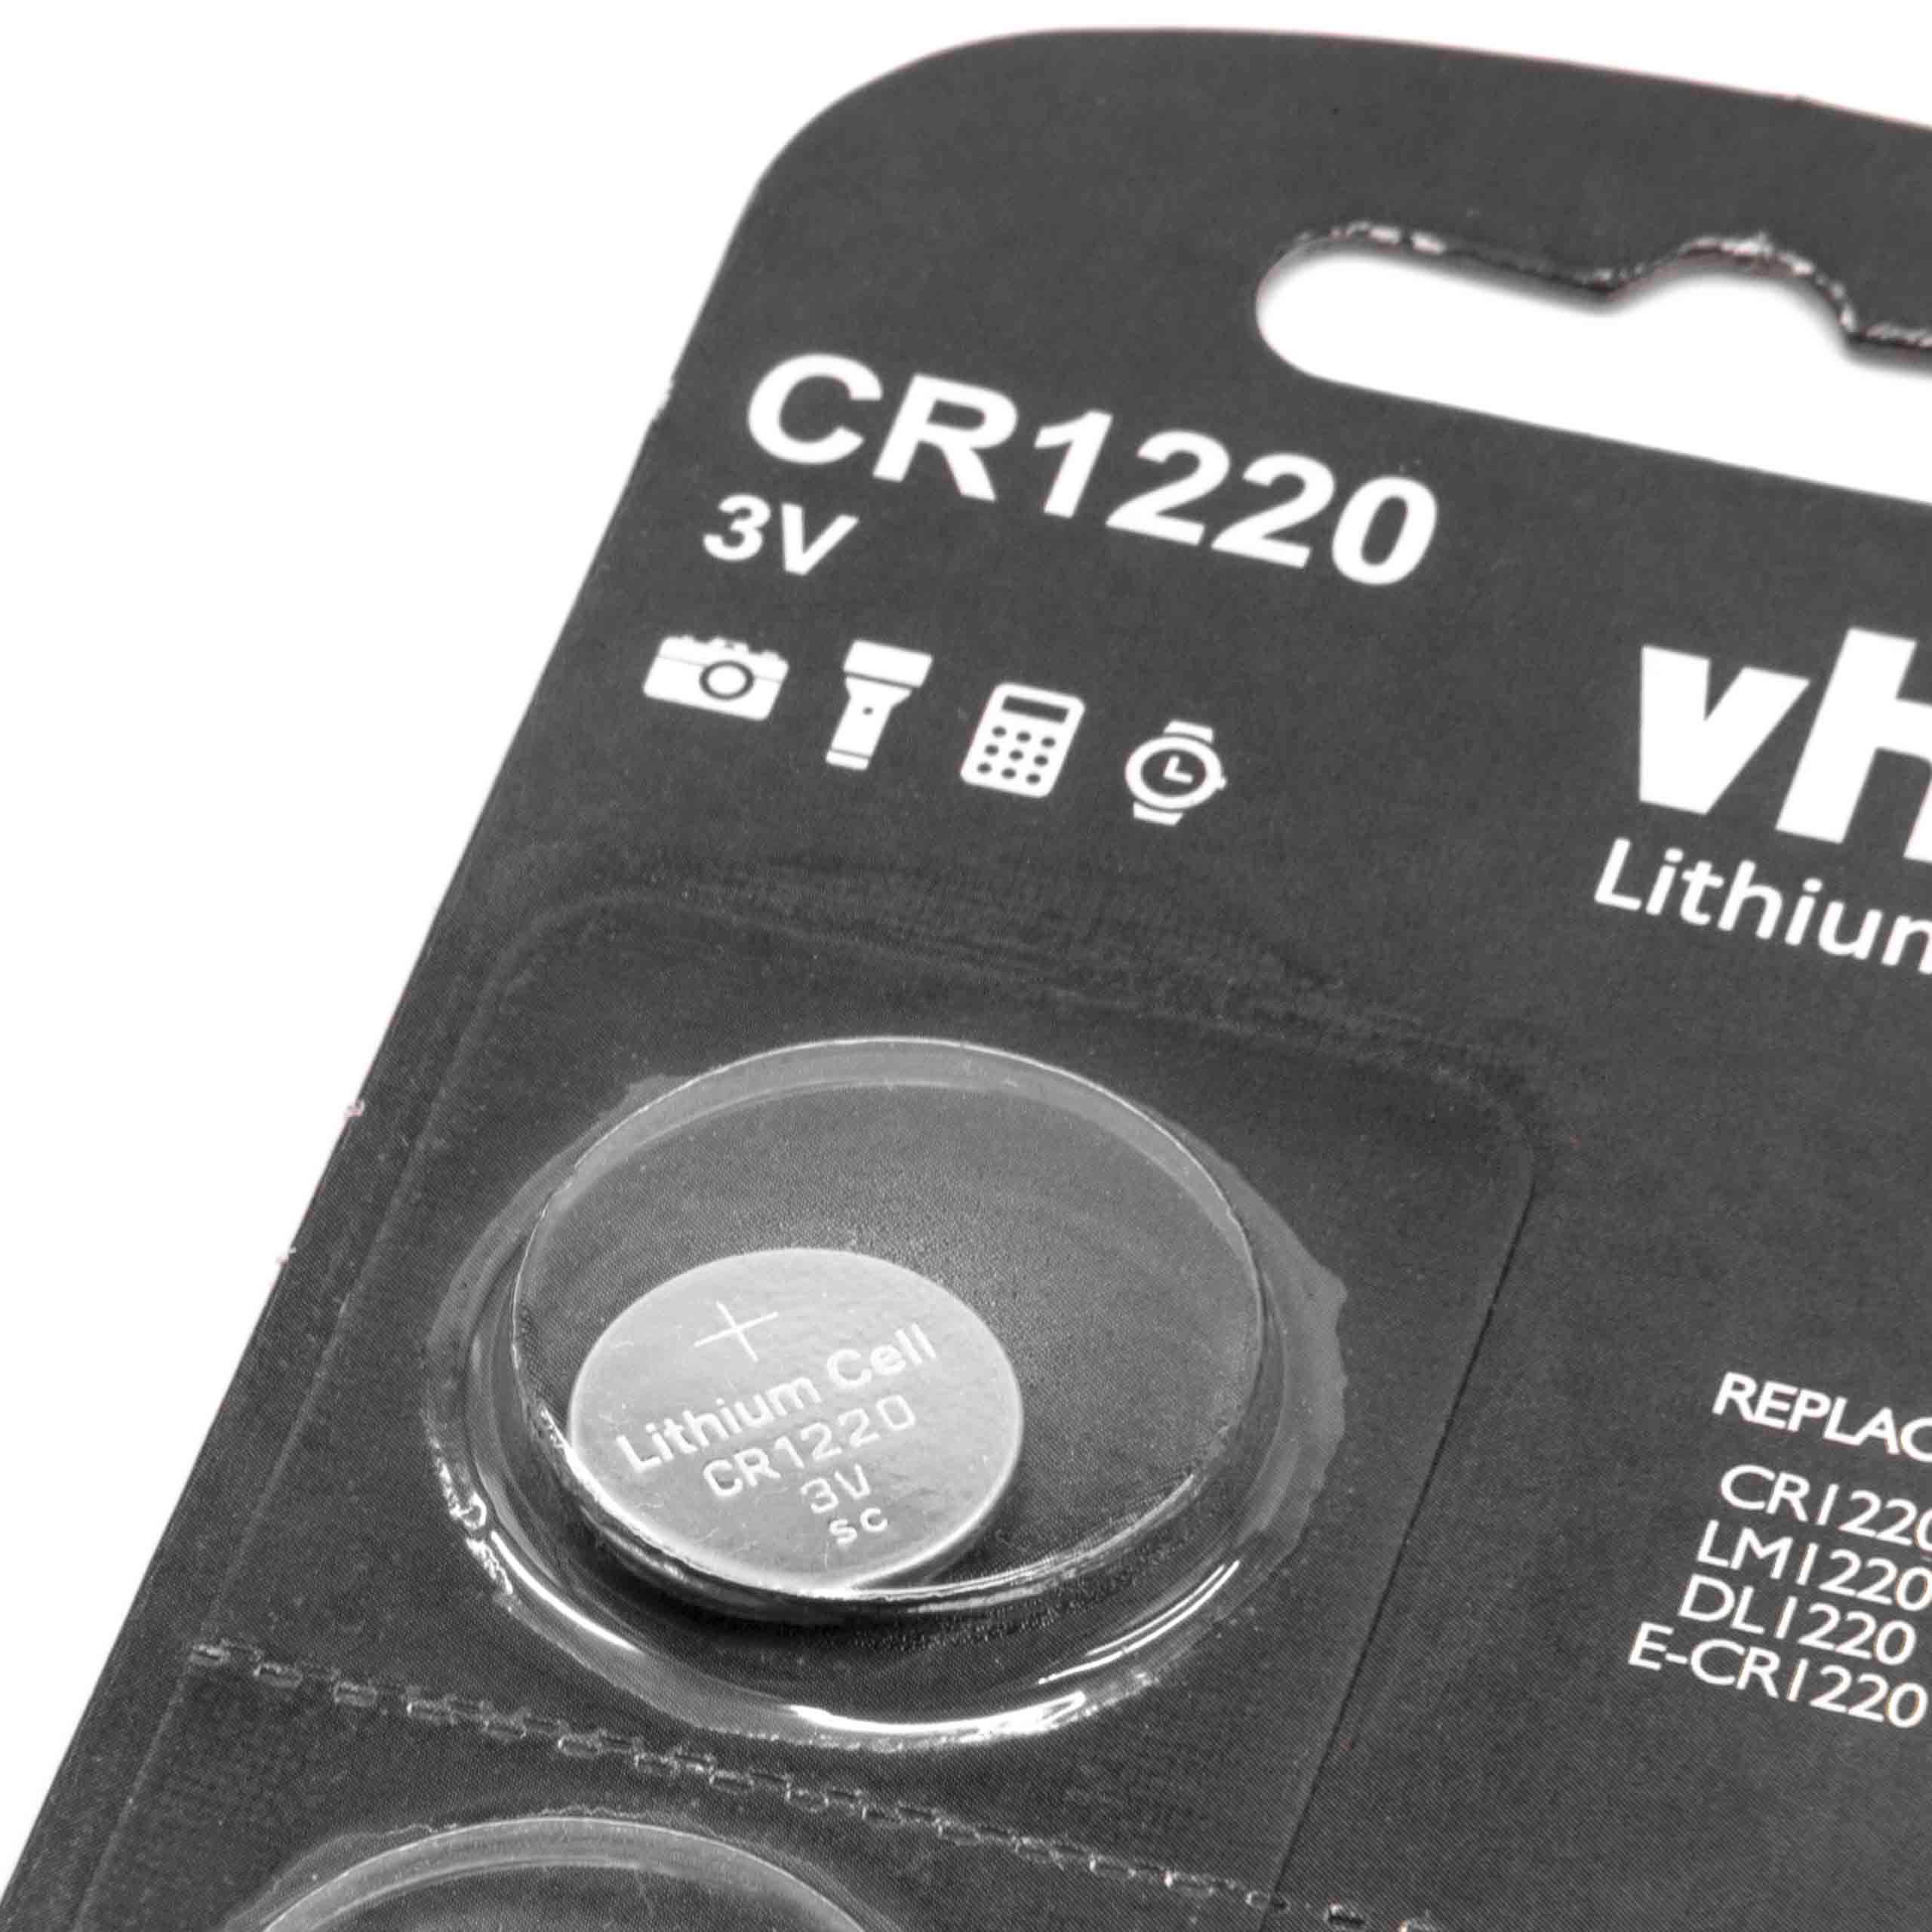 5x 3 V Li-Ion Button Coin Cell Battery Type CR1220 suitable for Hearing Aids, Watches, Car Keys, Scales etc.